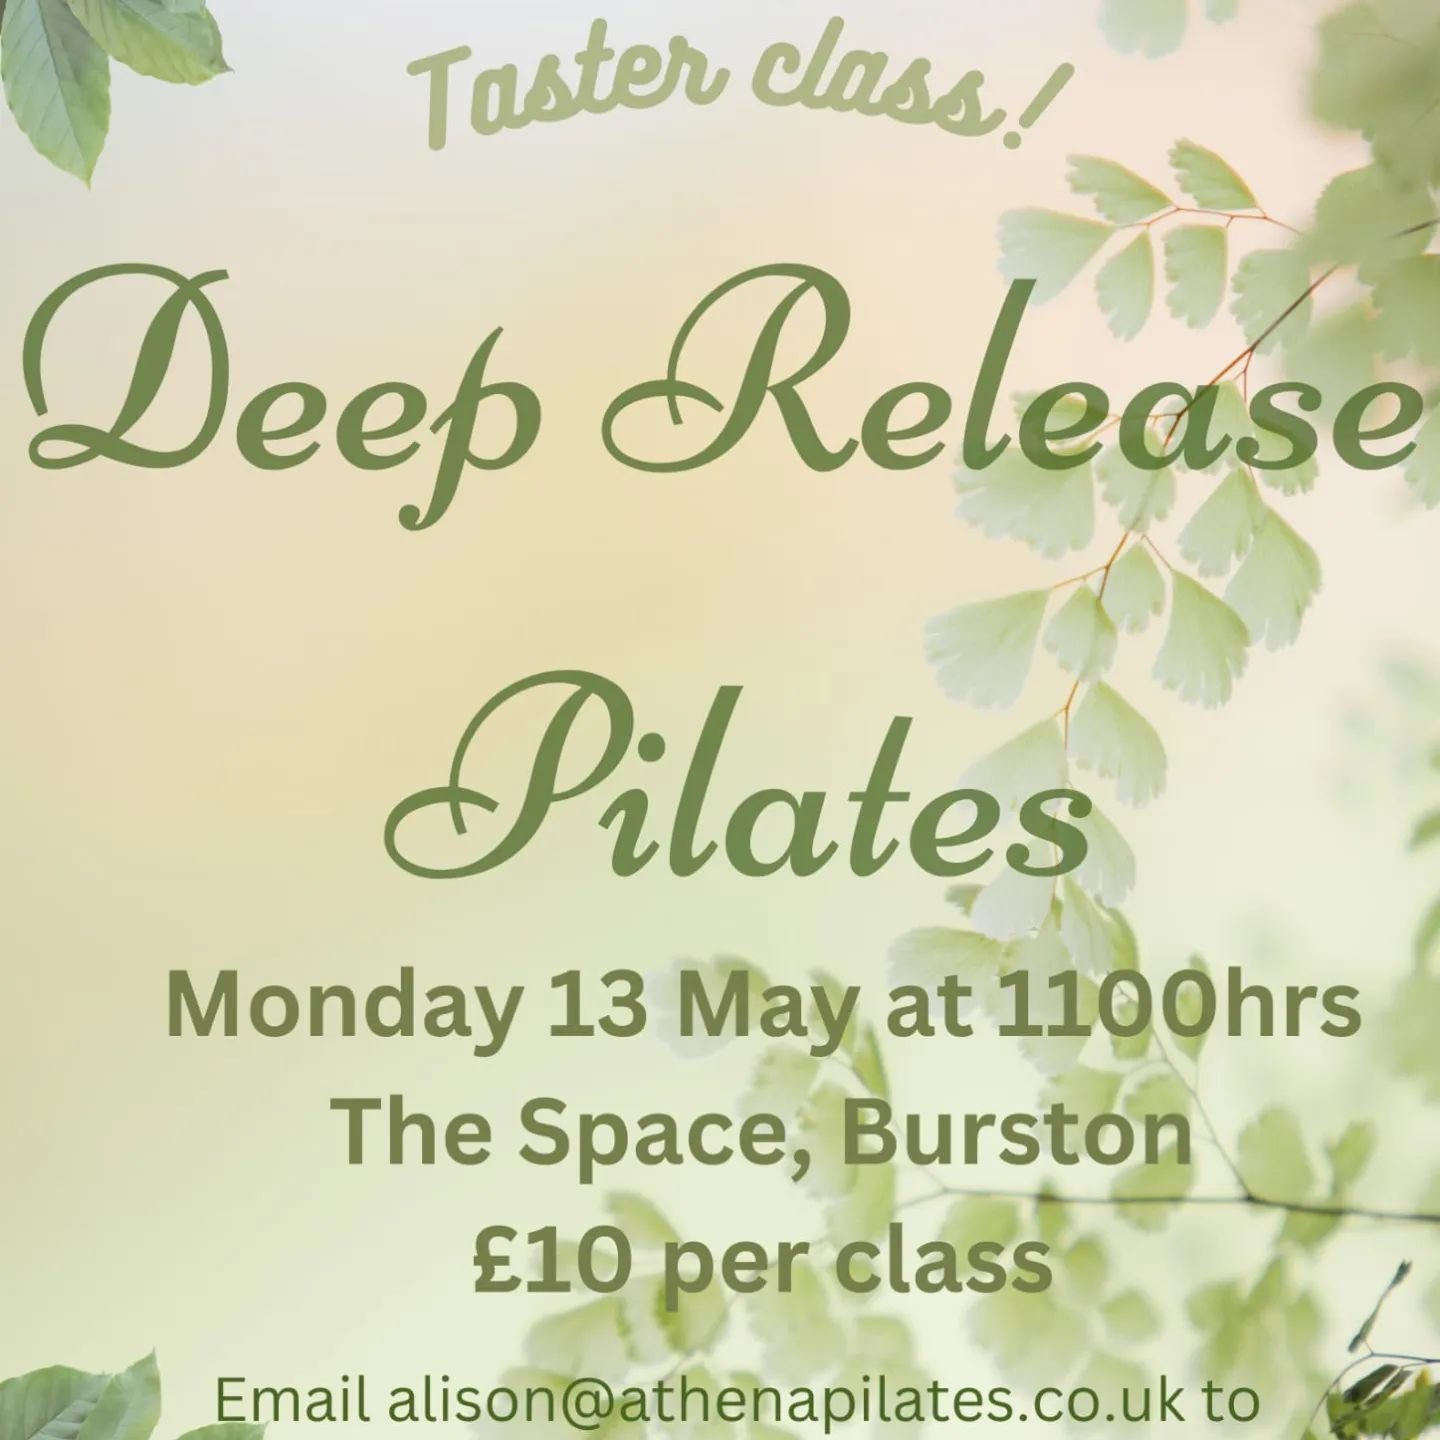 Join our new teacher Alison for a Deep Release Pilates Class next Monday at 11am.

This class is suitable for beginners and uses foam rollers and prickle balls alongside traditional Pilates techniques to release you from the inside out. You will leav